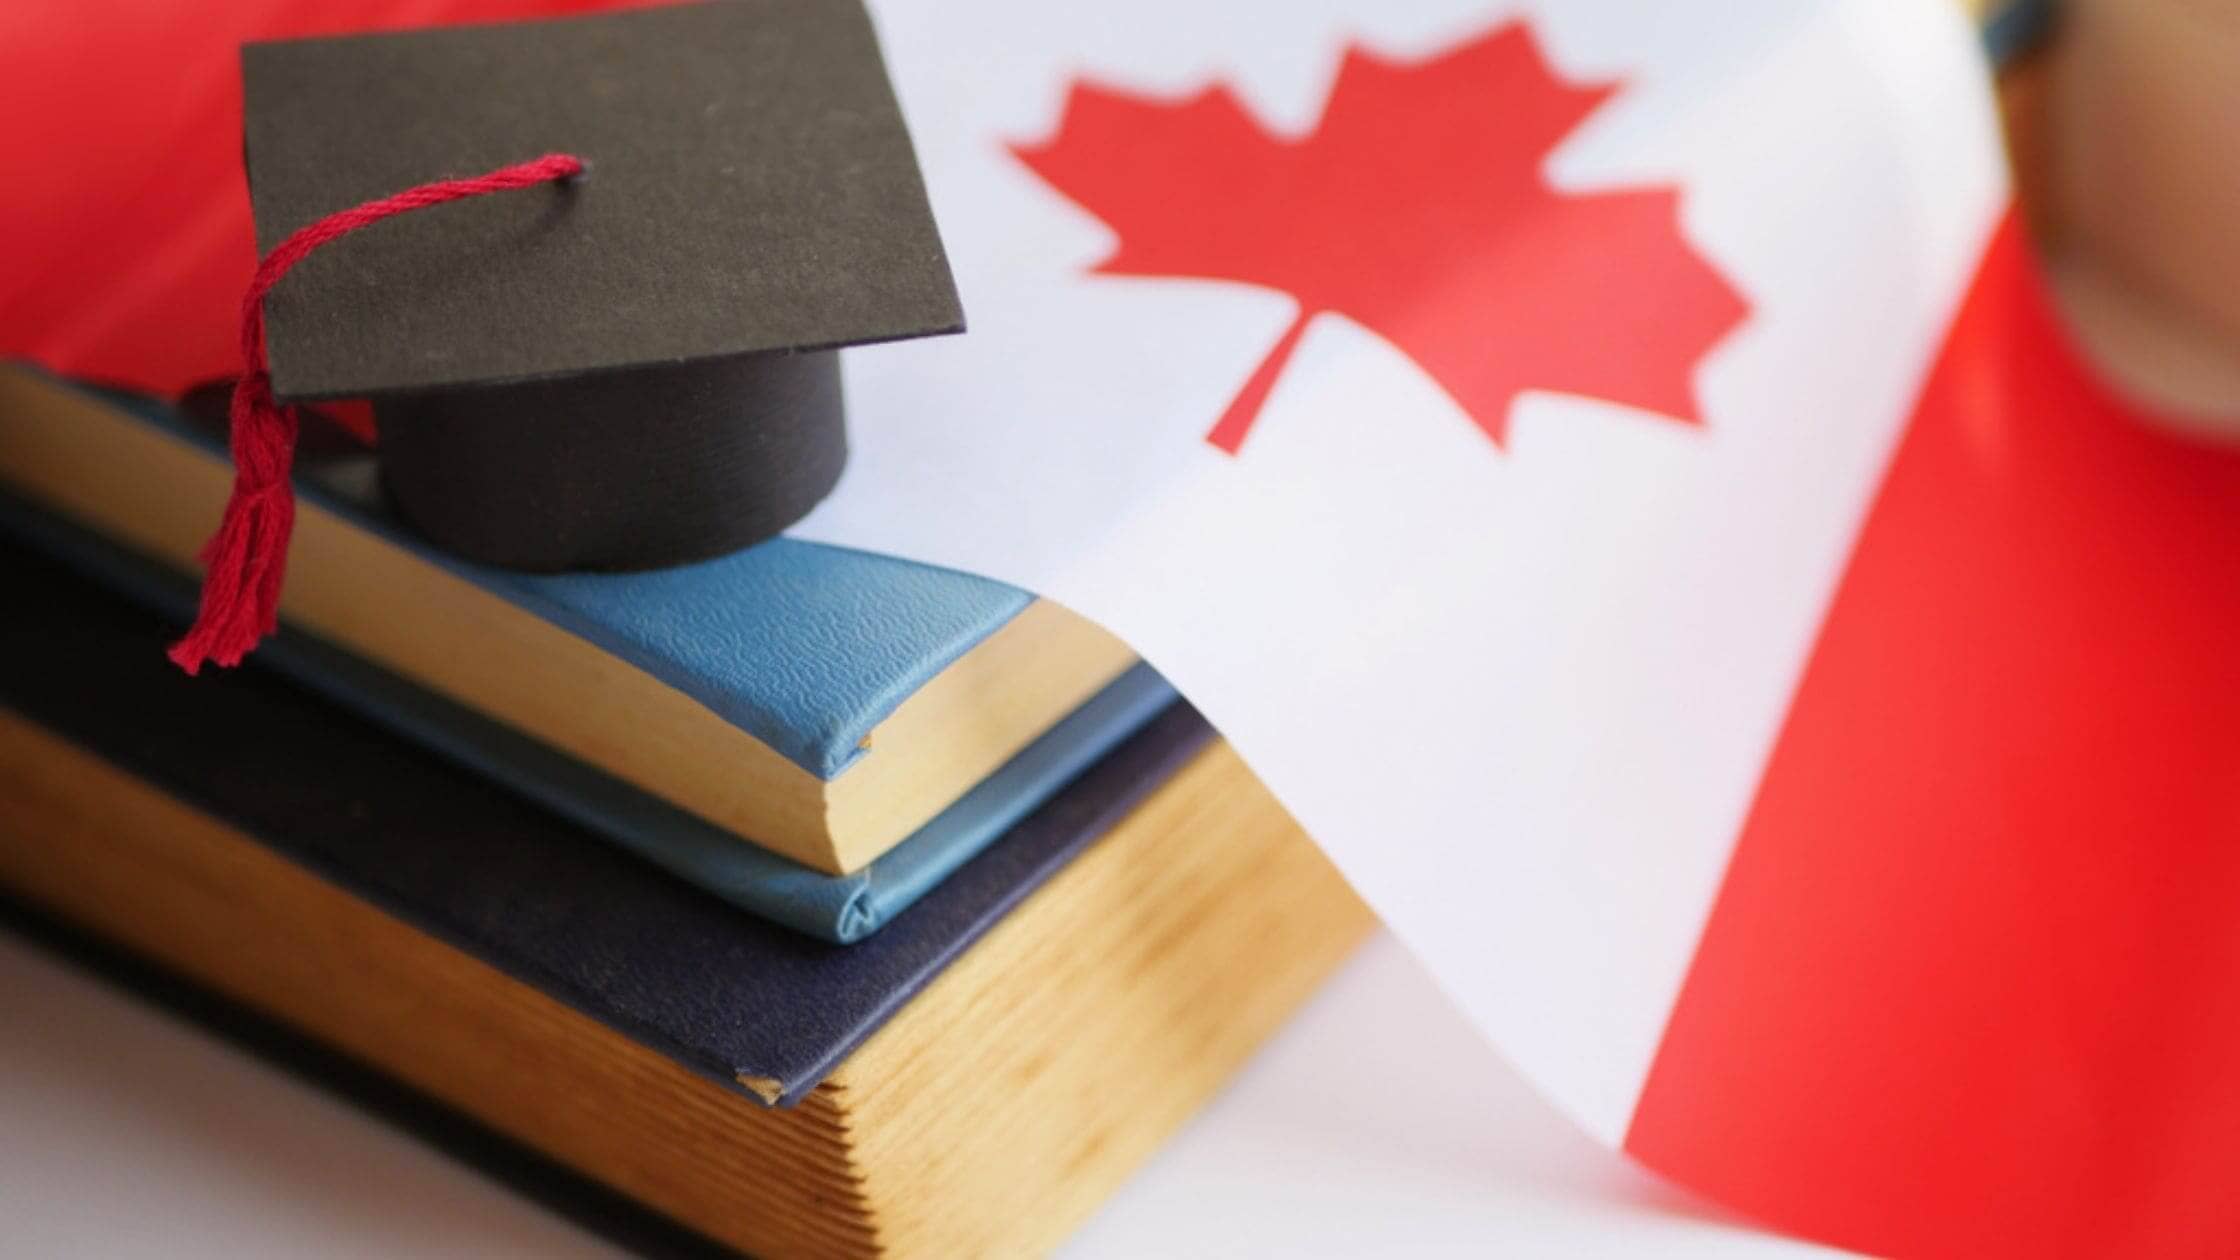 Top 10 Reasons To Study For A Bachelor’s Degree In Canada